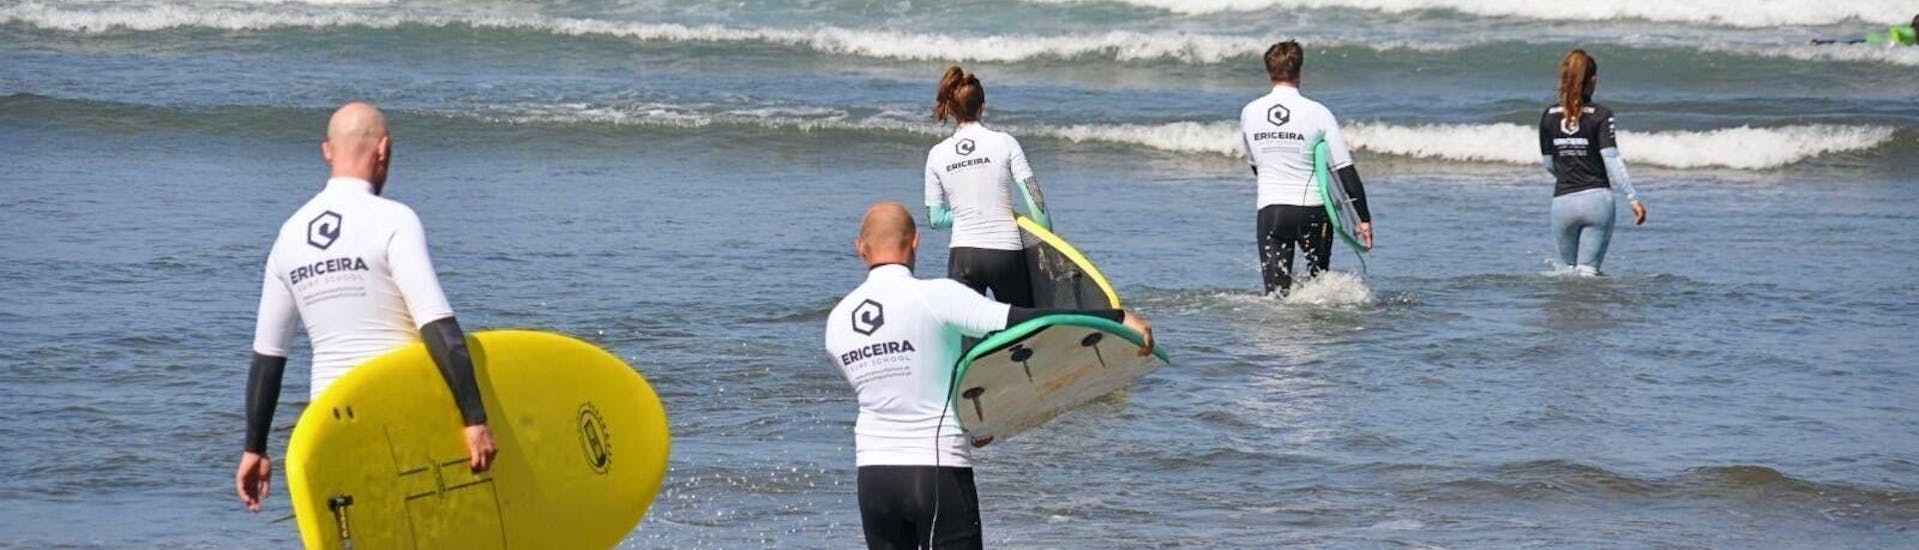 Surfing Lessons for Beginners with Ericeira Surf School - Hero image